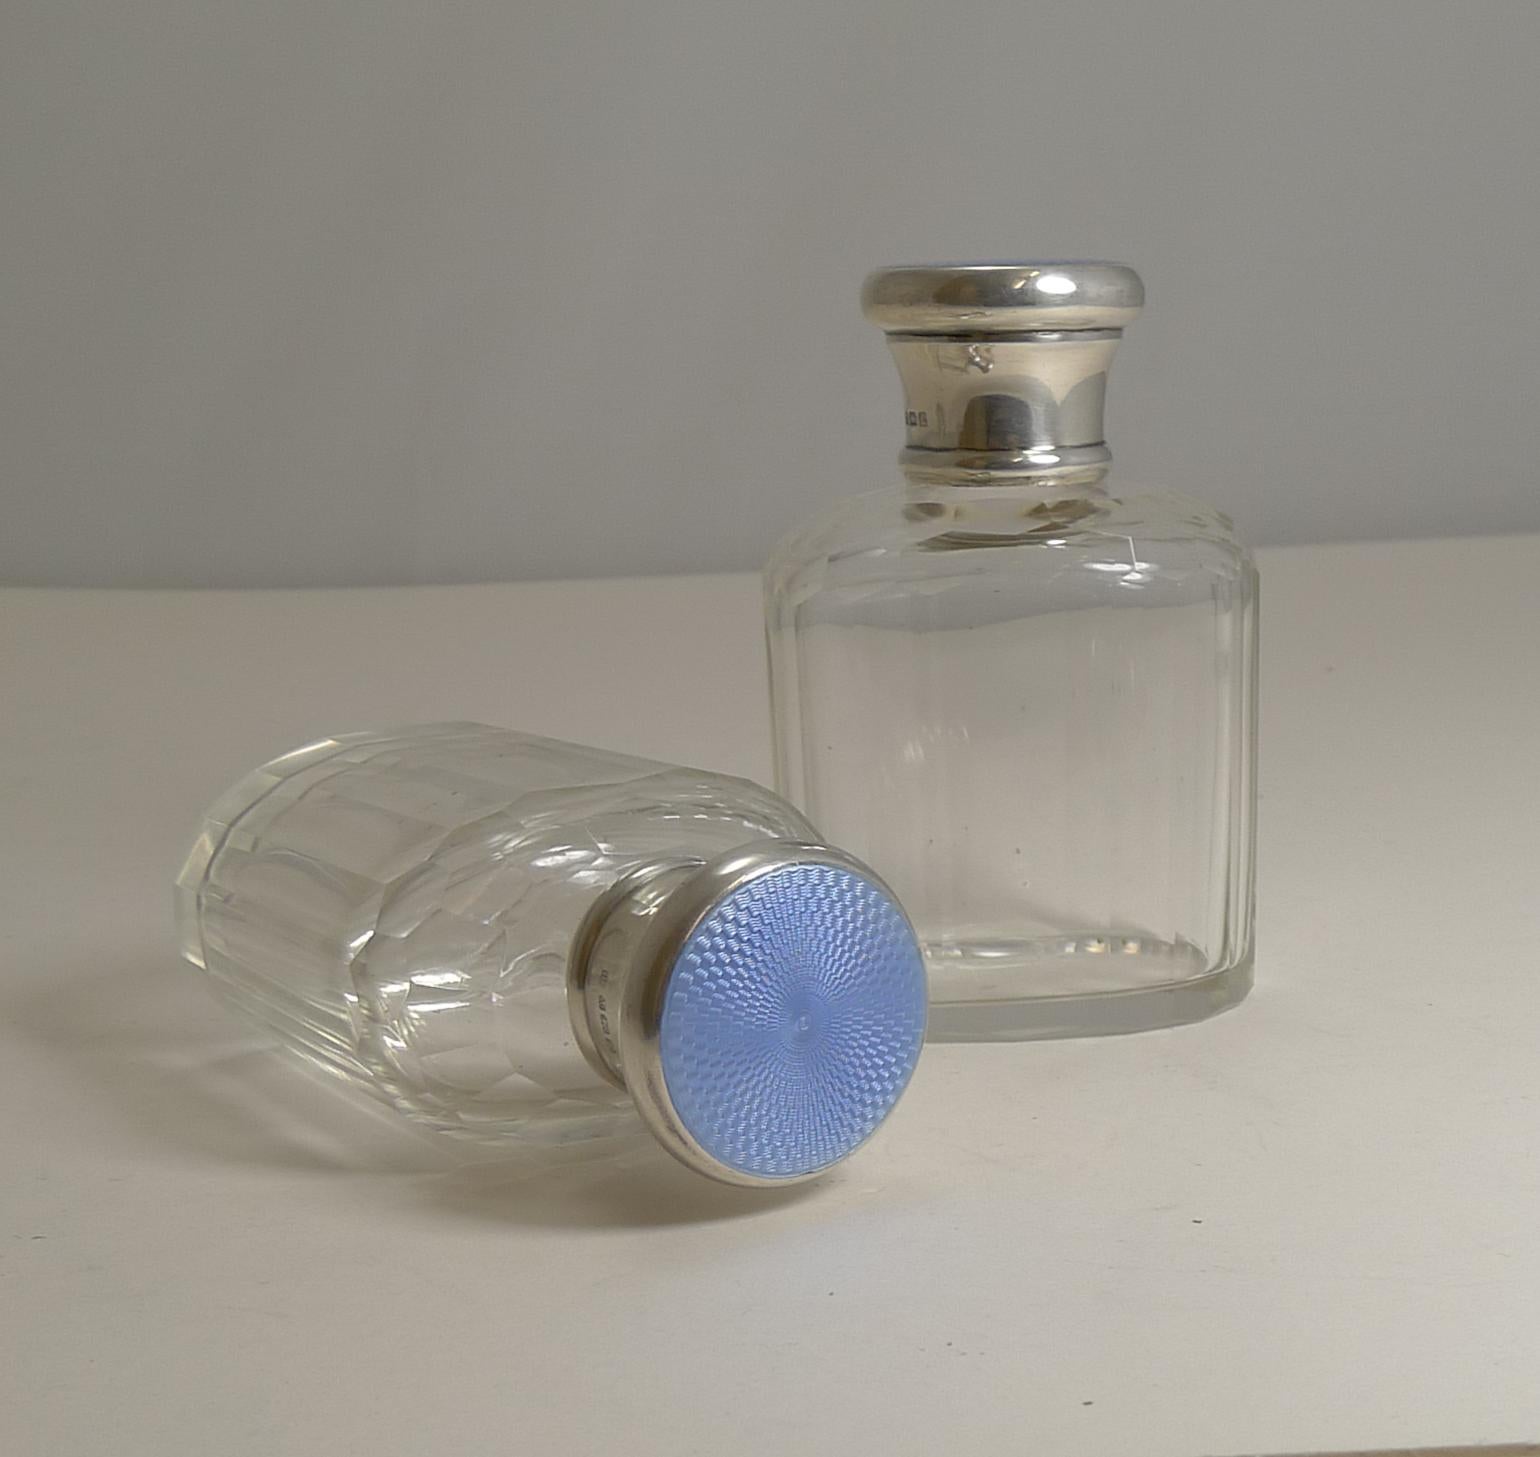 A wonderful matching pair of cologne or scent bottles made from cut crystal without damage. The screw caps are made from English sterling silver with a hallmark for Birmingham 1924 together with the makers initials for Charles Green & Son.

The